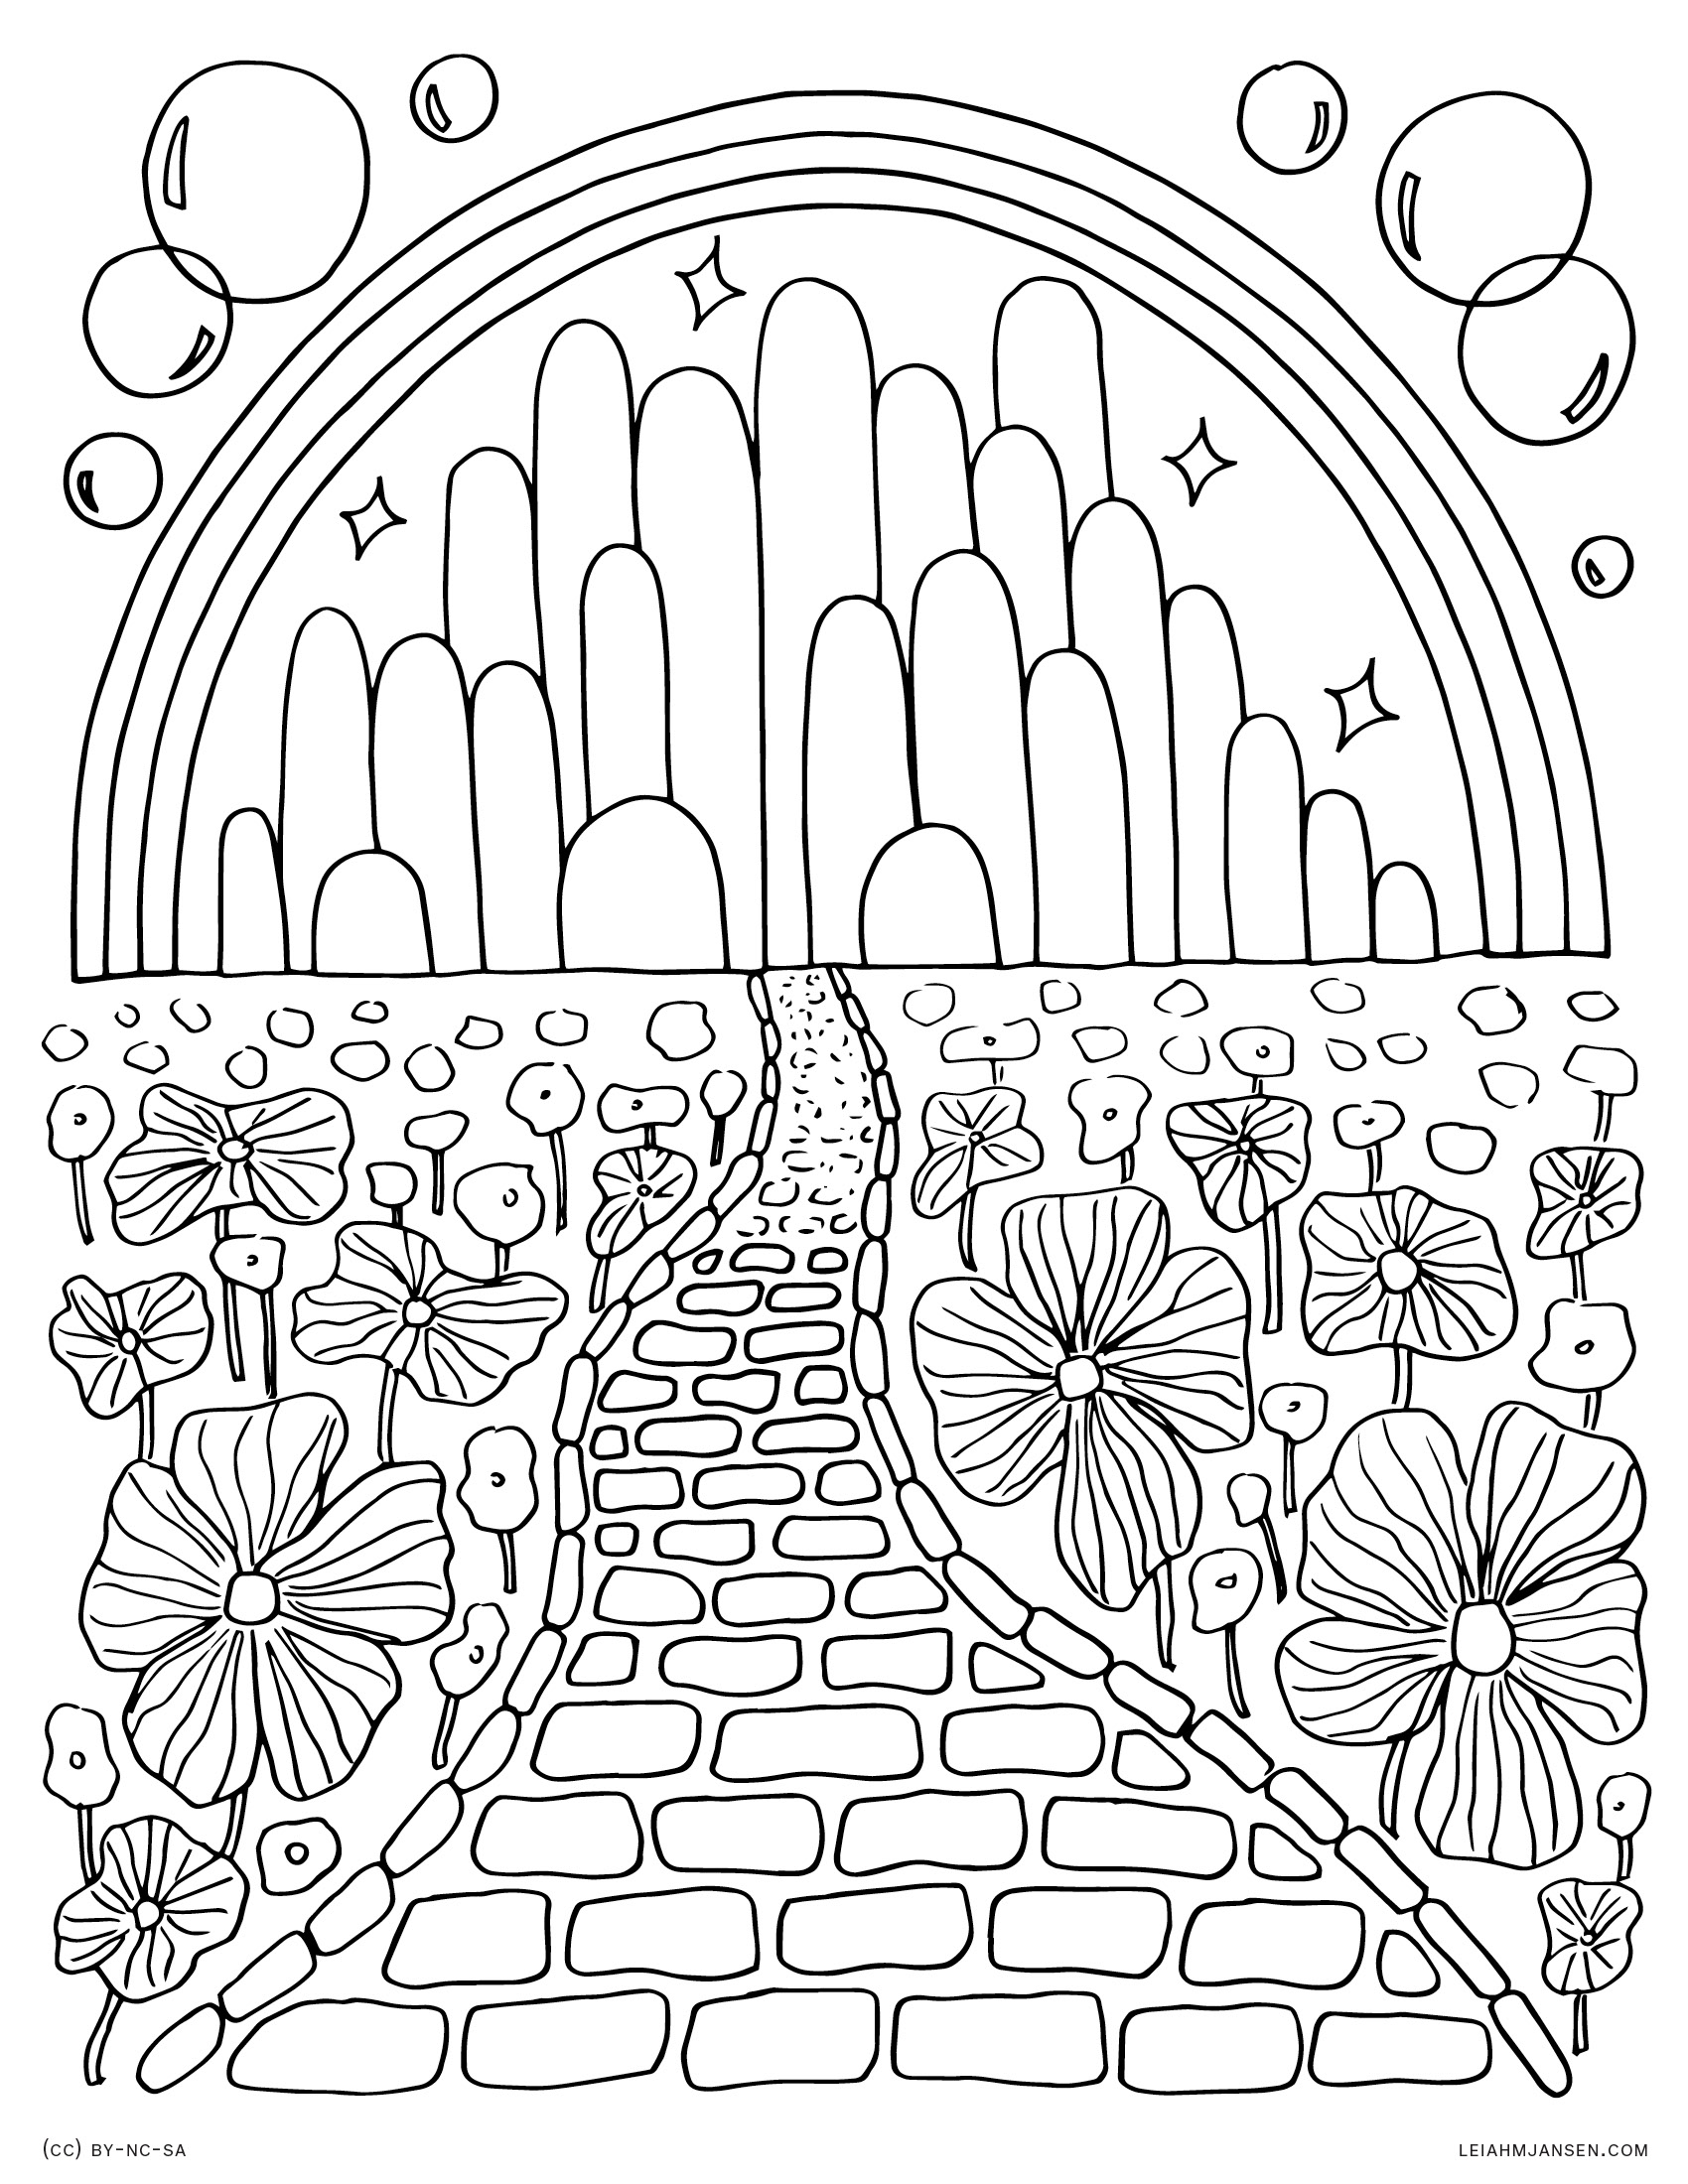 yellow brick road coloring pages - photo #16